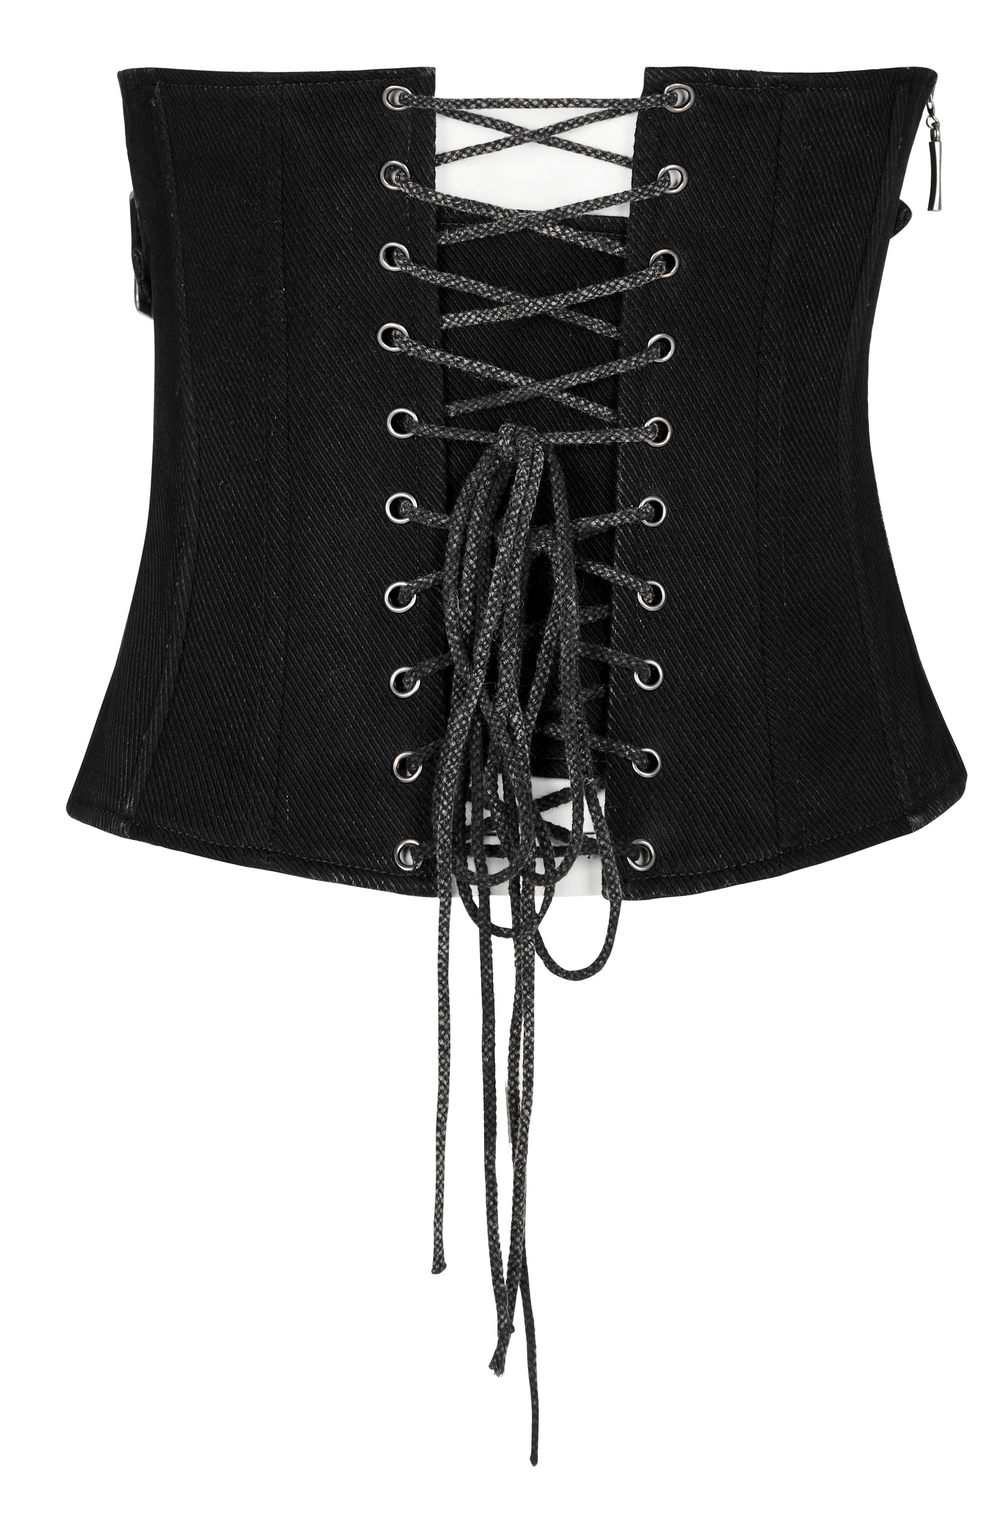 Edgy Twill Fabric Corset with Metal Skull Rivets